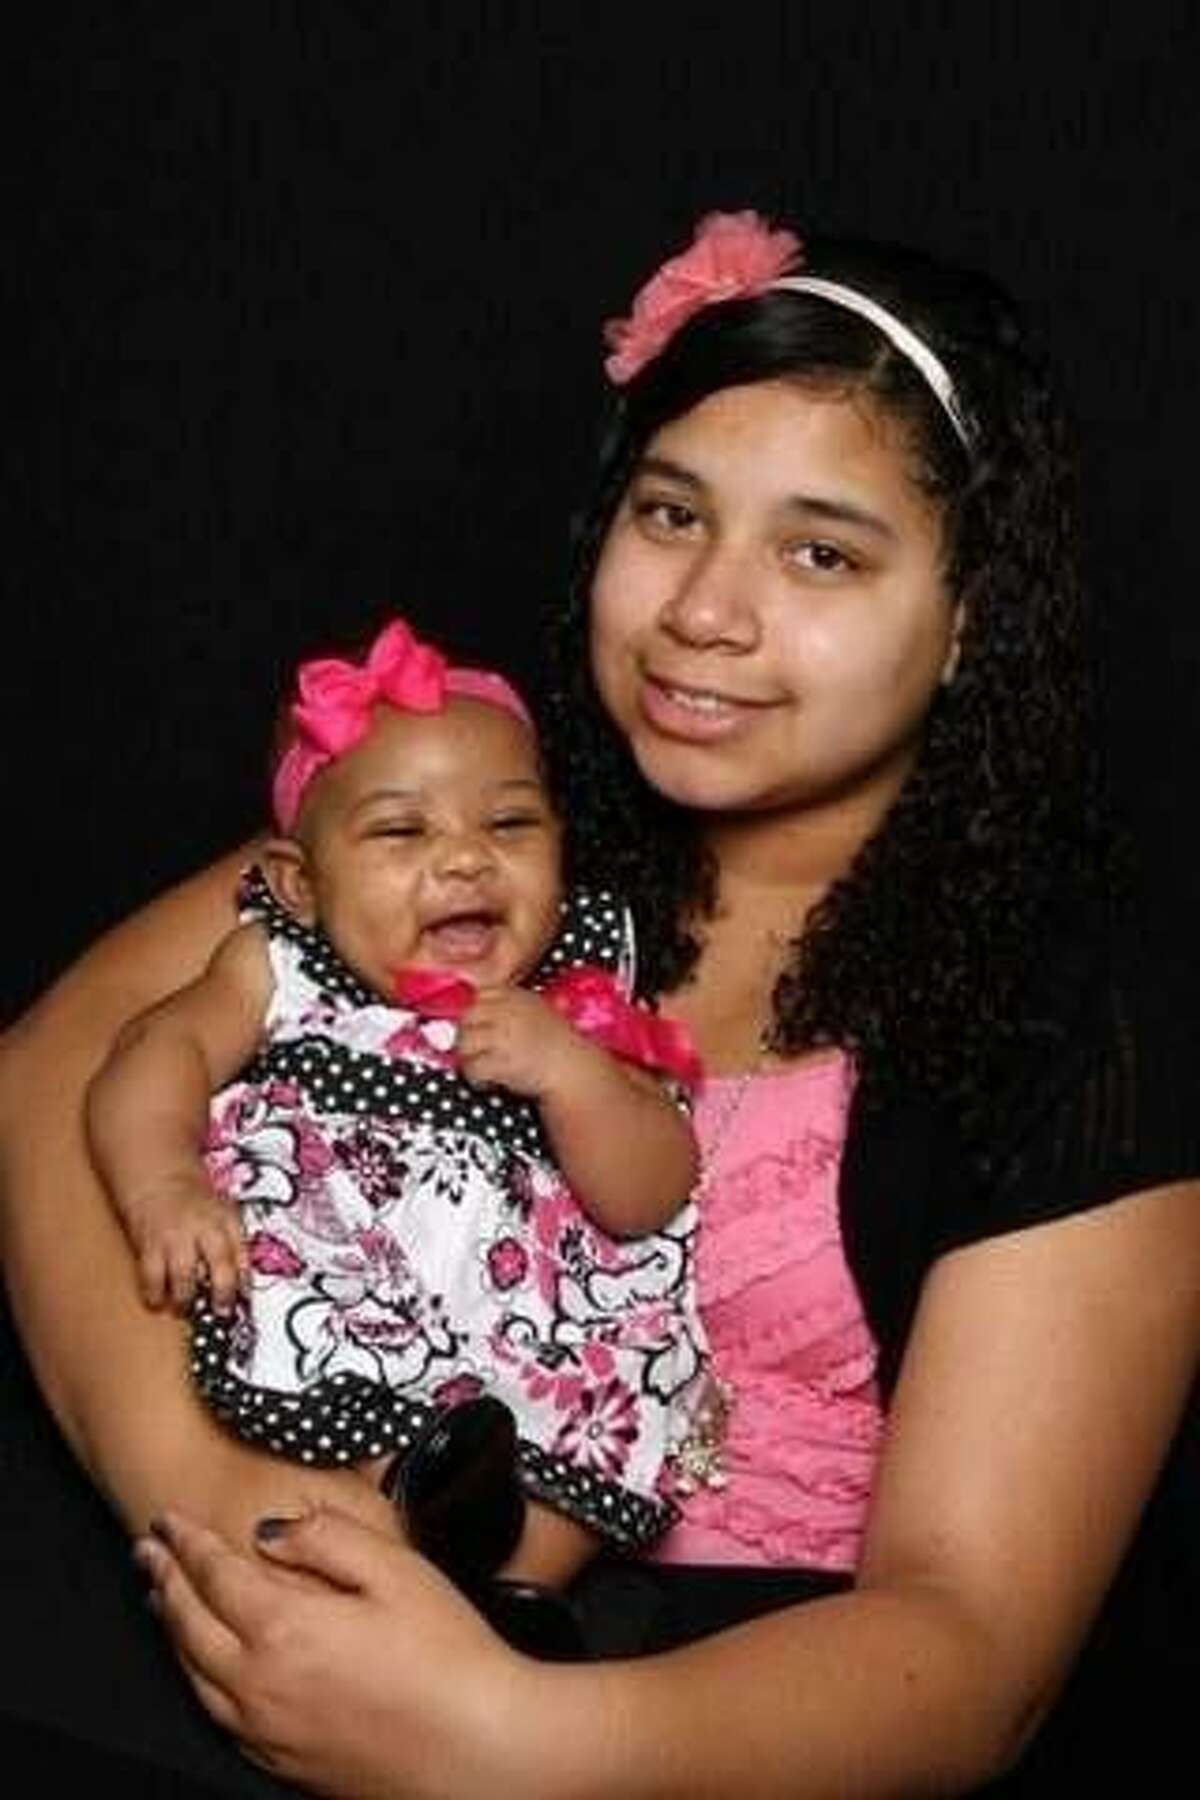 Sade Brantley, 13, and her sister, Madisyn Mitchell, 1, were killed Aug. 9 when a plane crashed into their house.